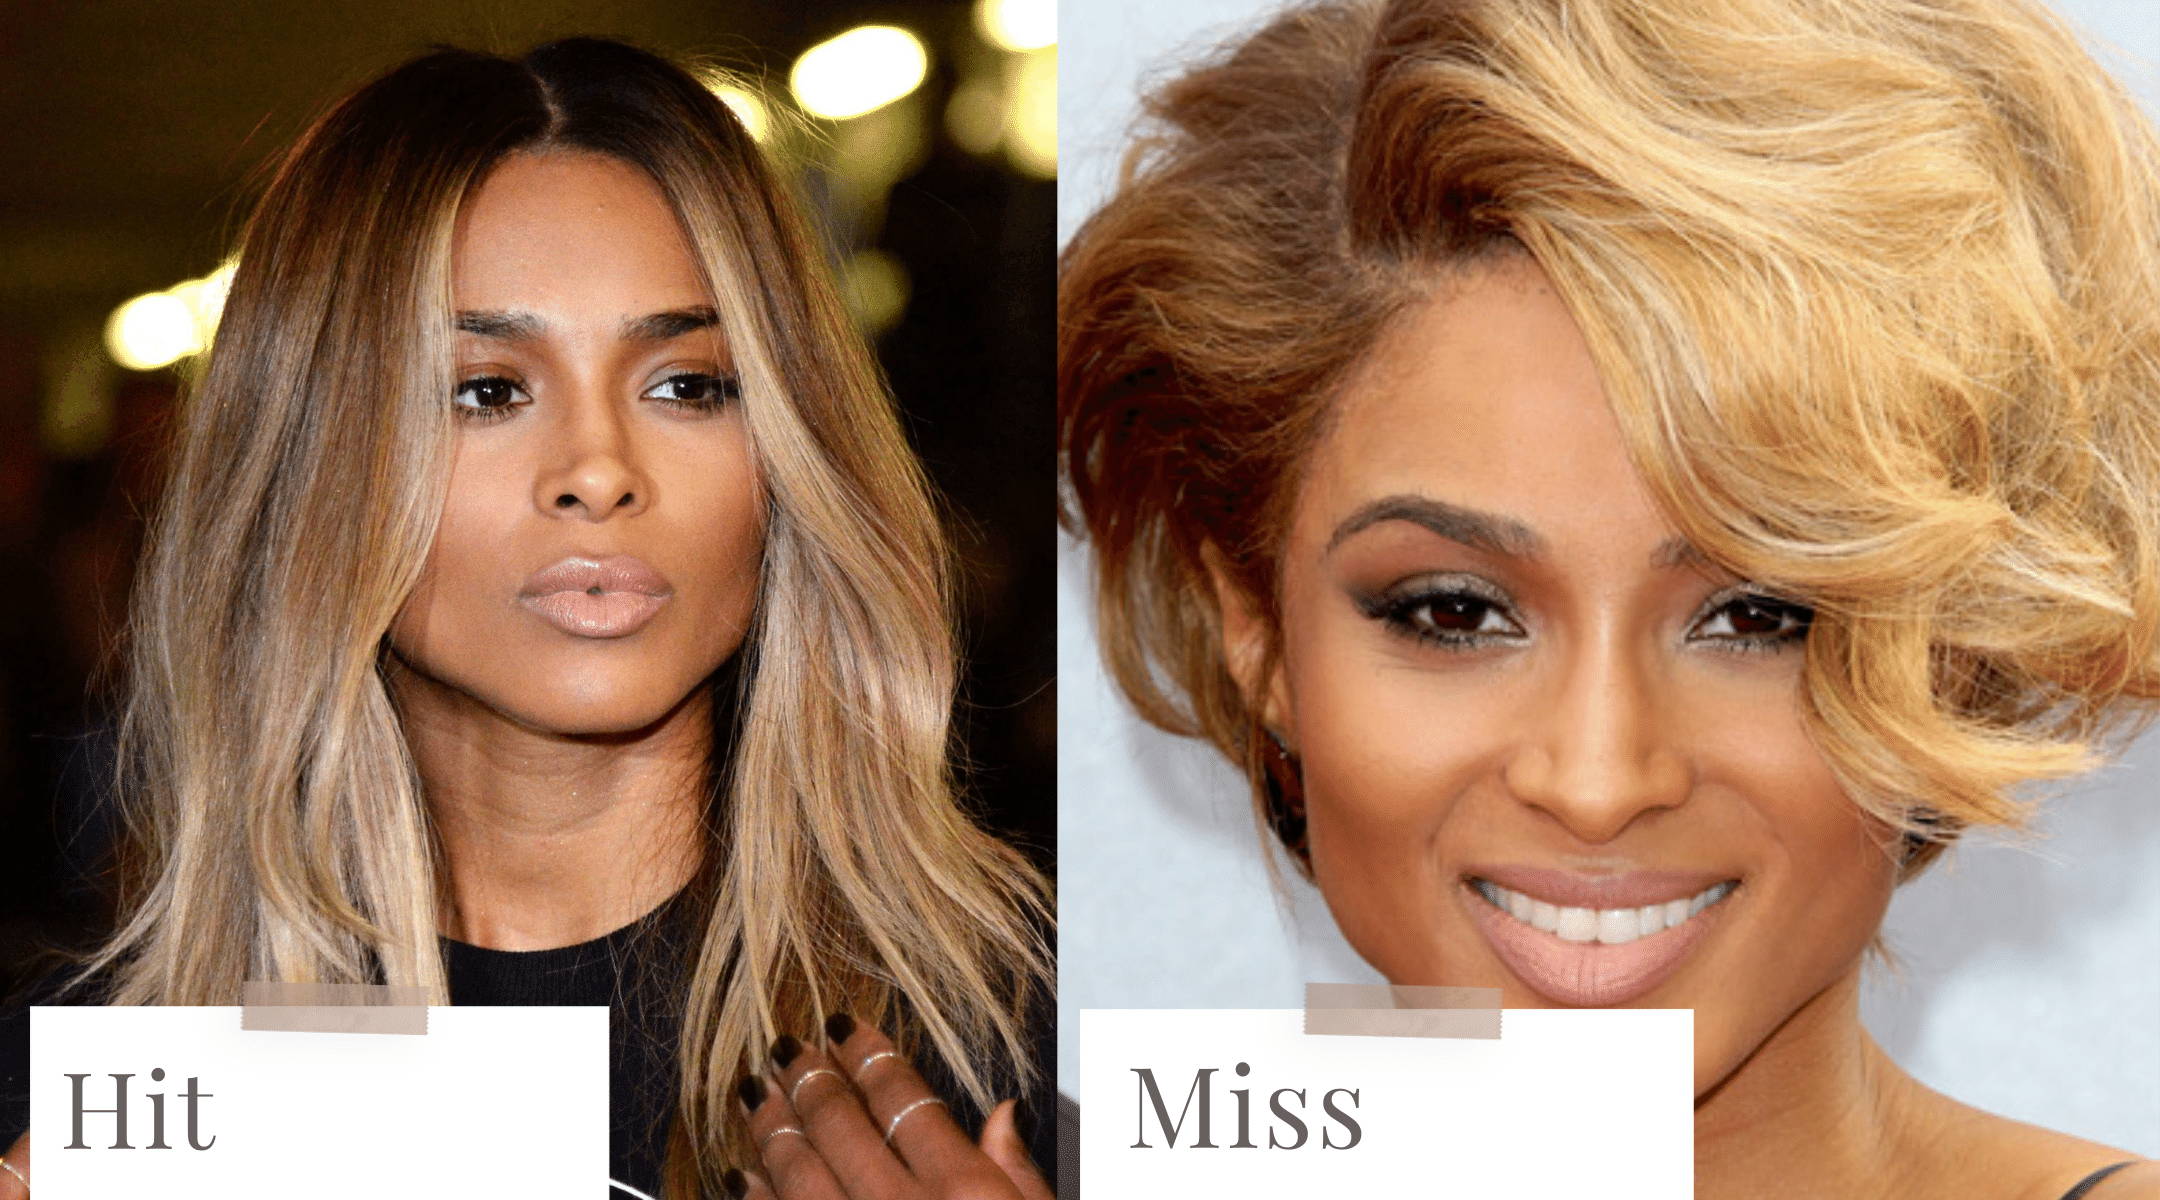 What Hair Color is Best For My Skin Tone